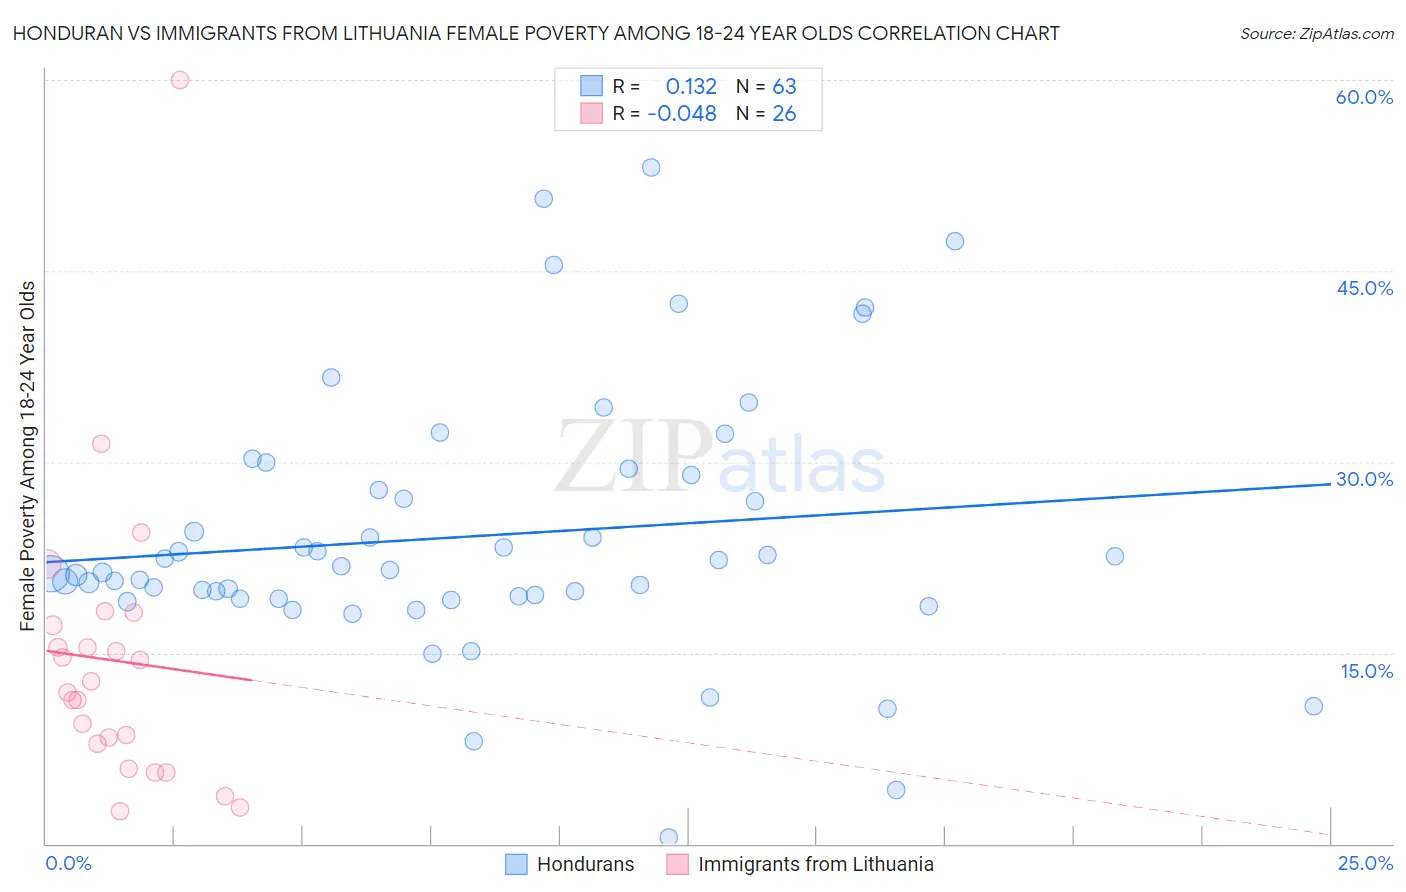 Honduran vs Immigrants from Lithuania Female Poverty Among 18-24 Year Olds